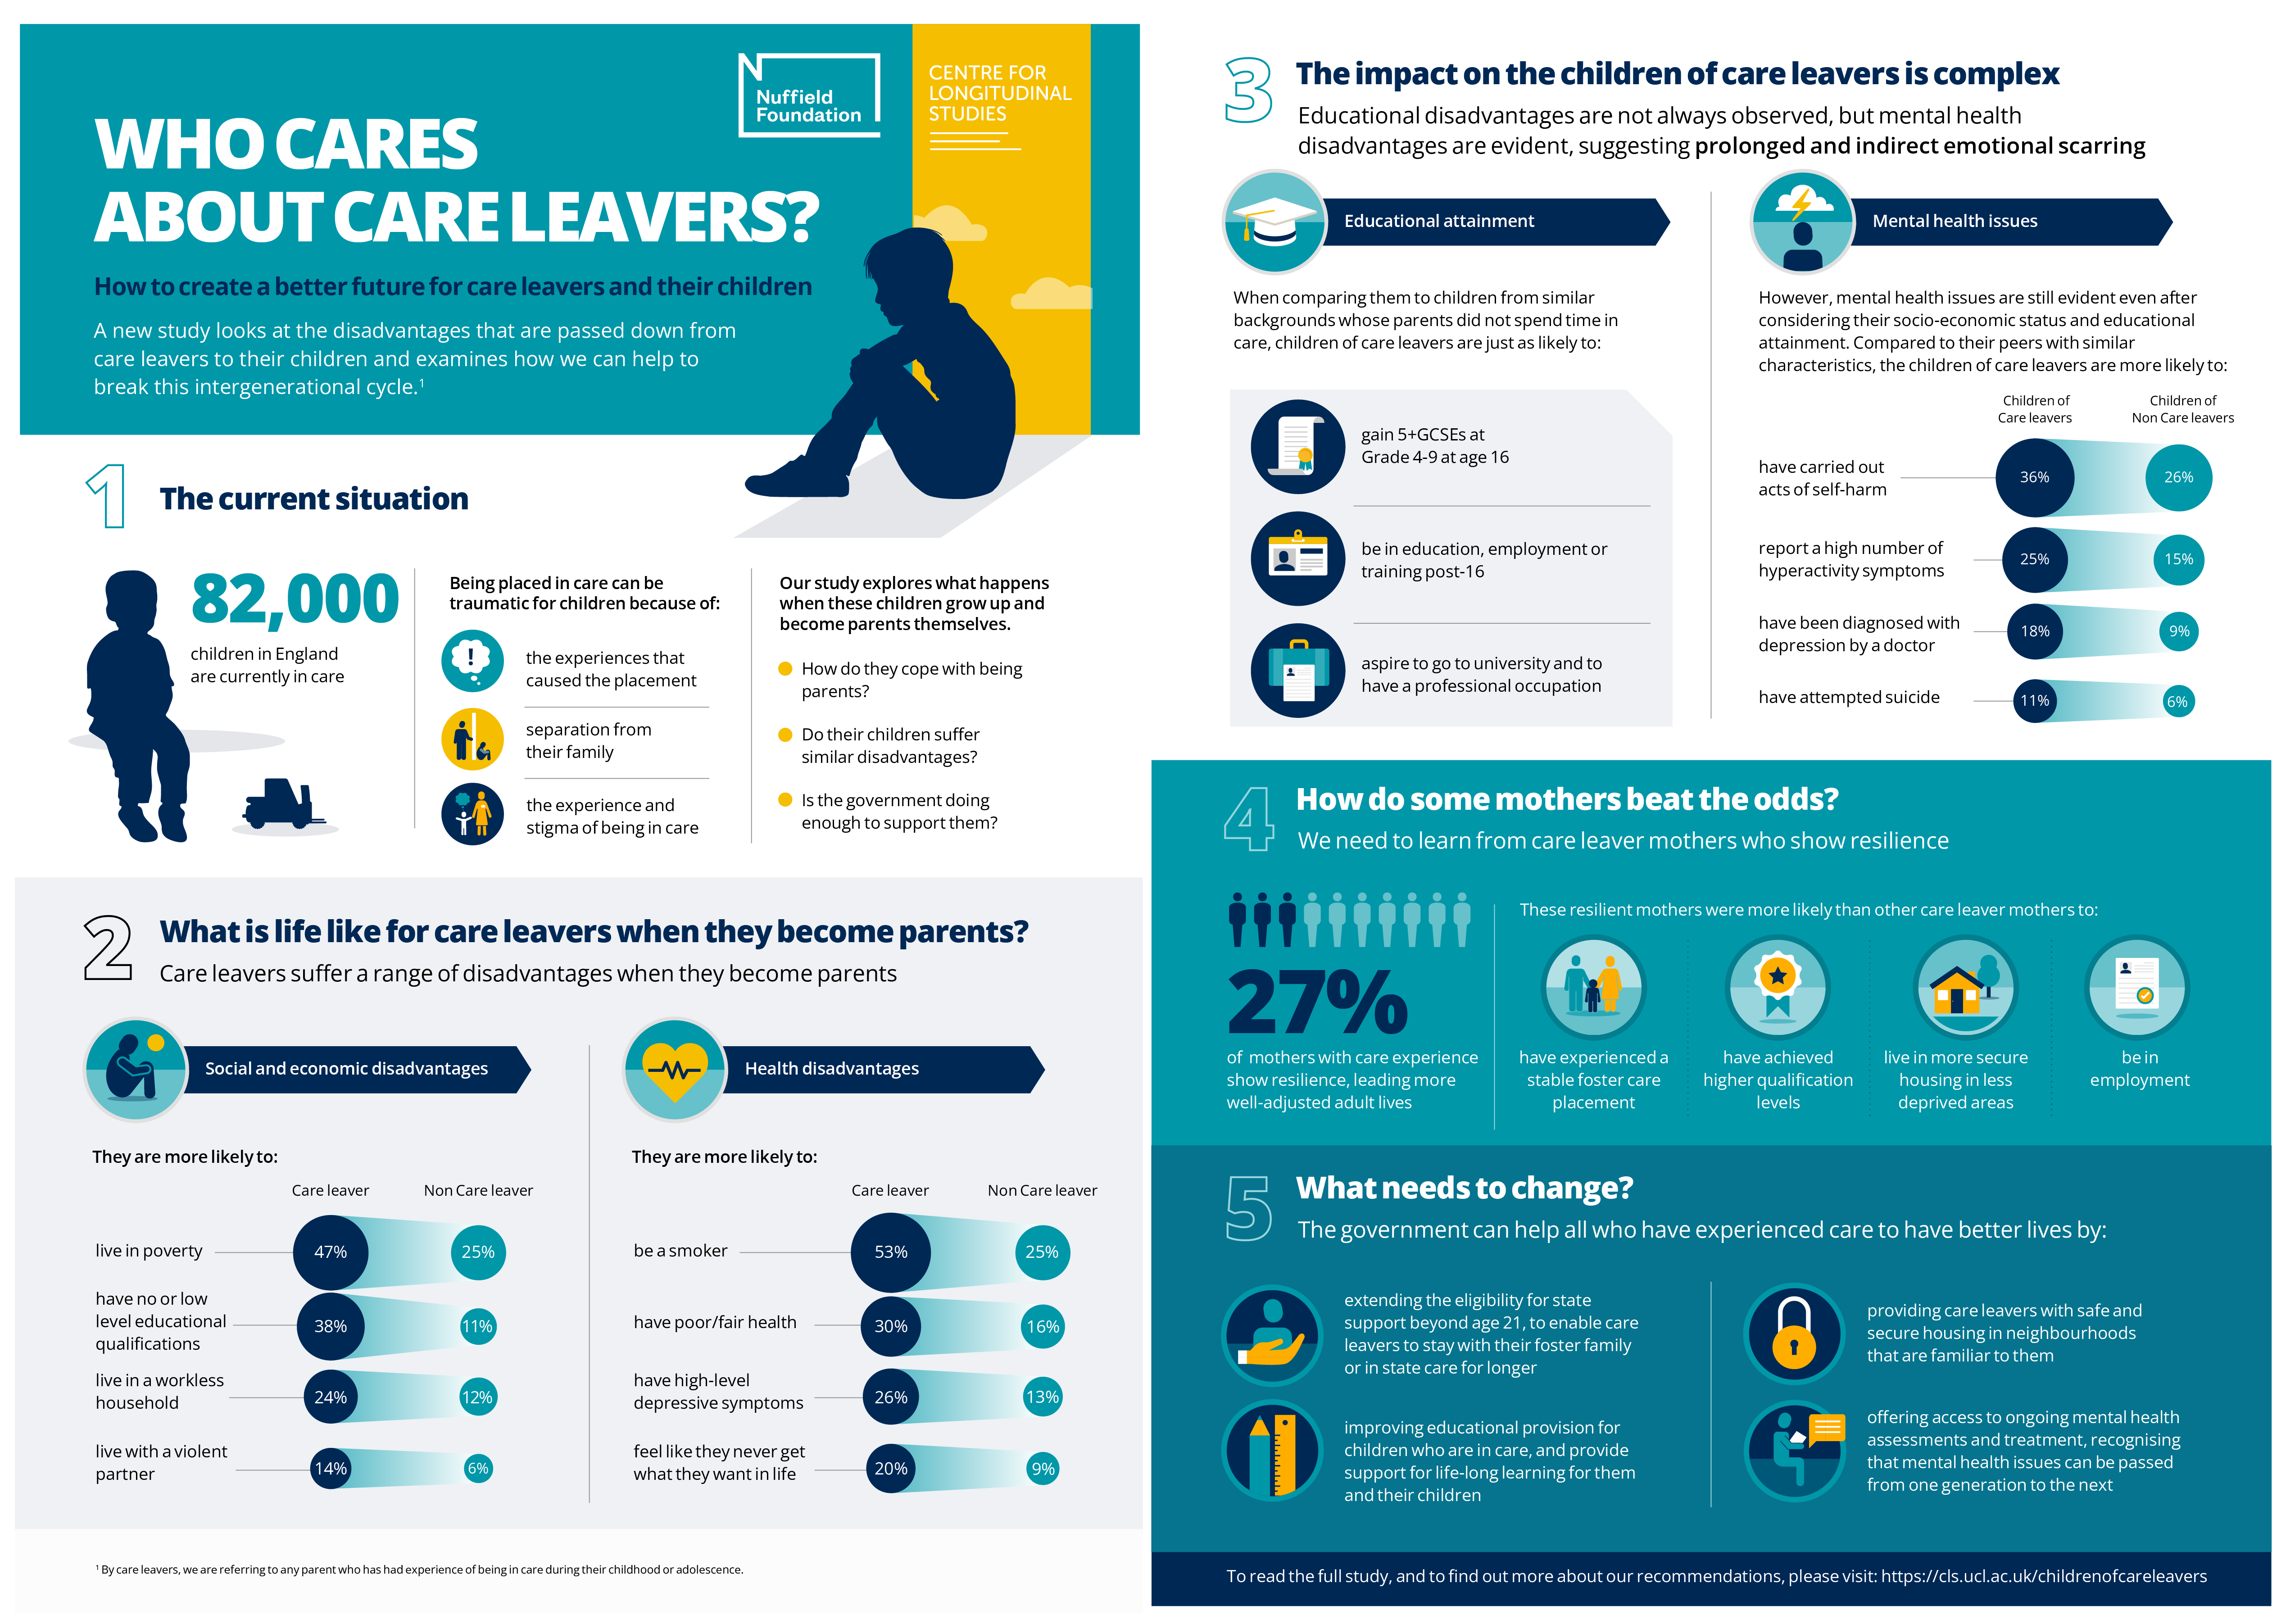 Infographic showing statistics and research about the children of care leavers.